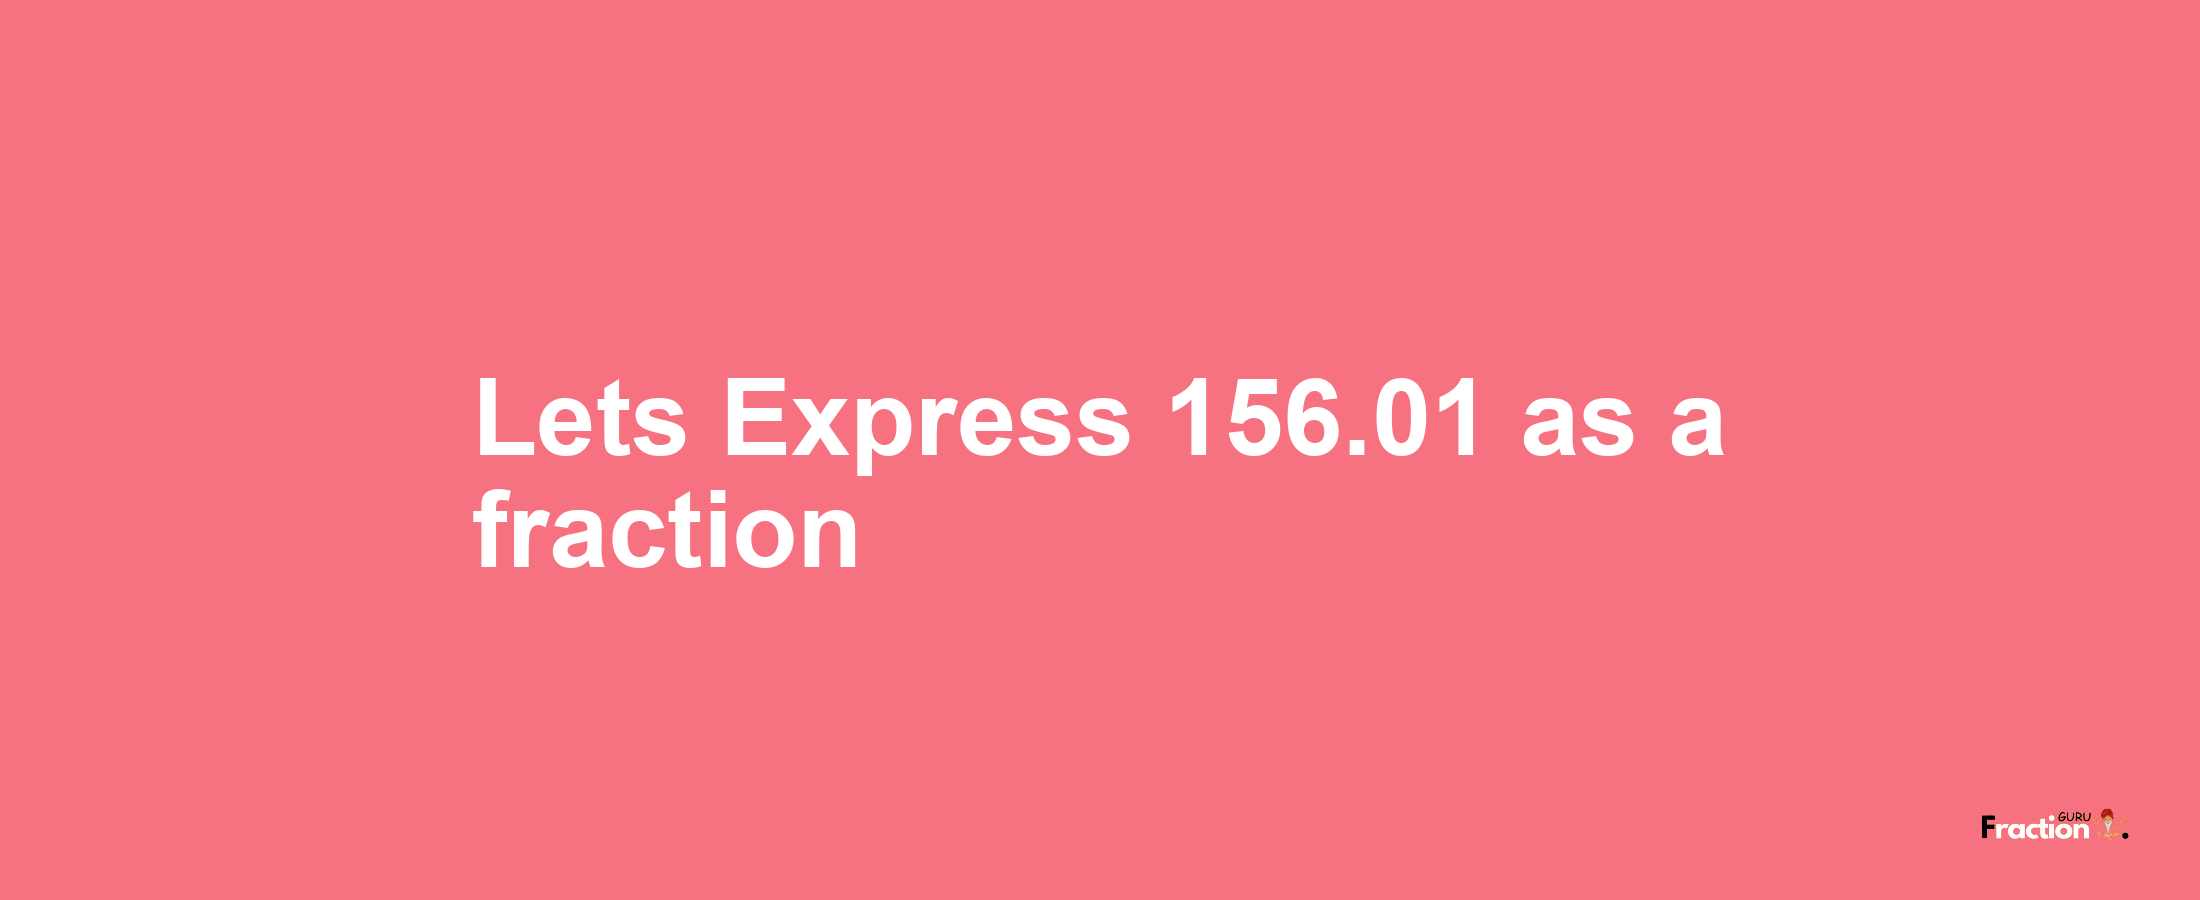 Lets Express 156.01 as afraction